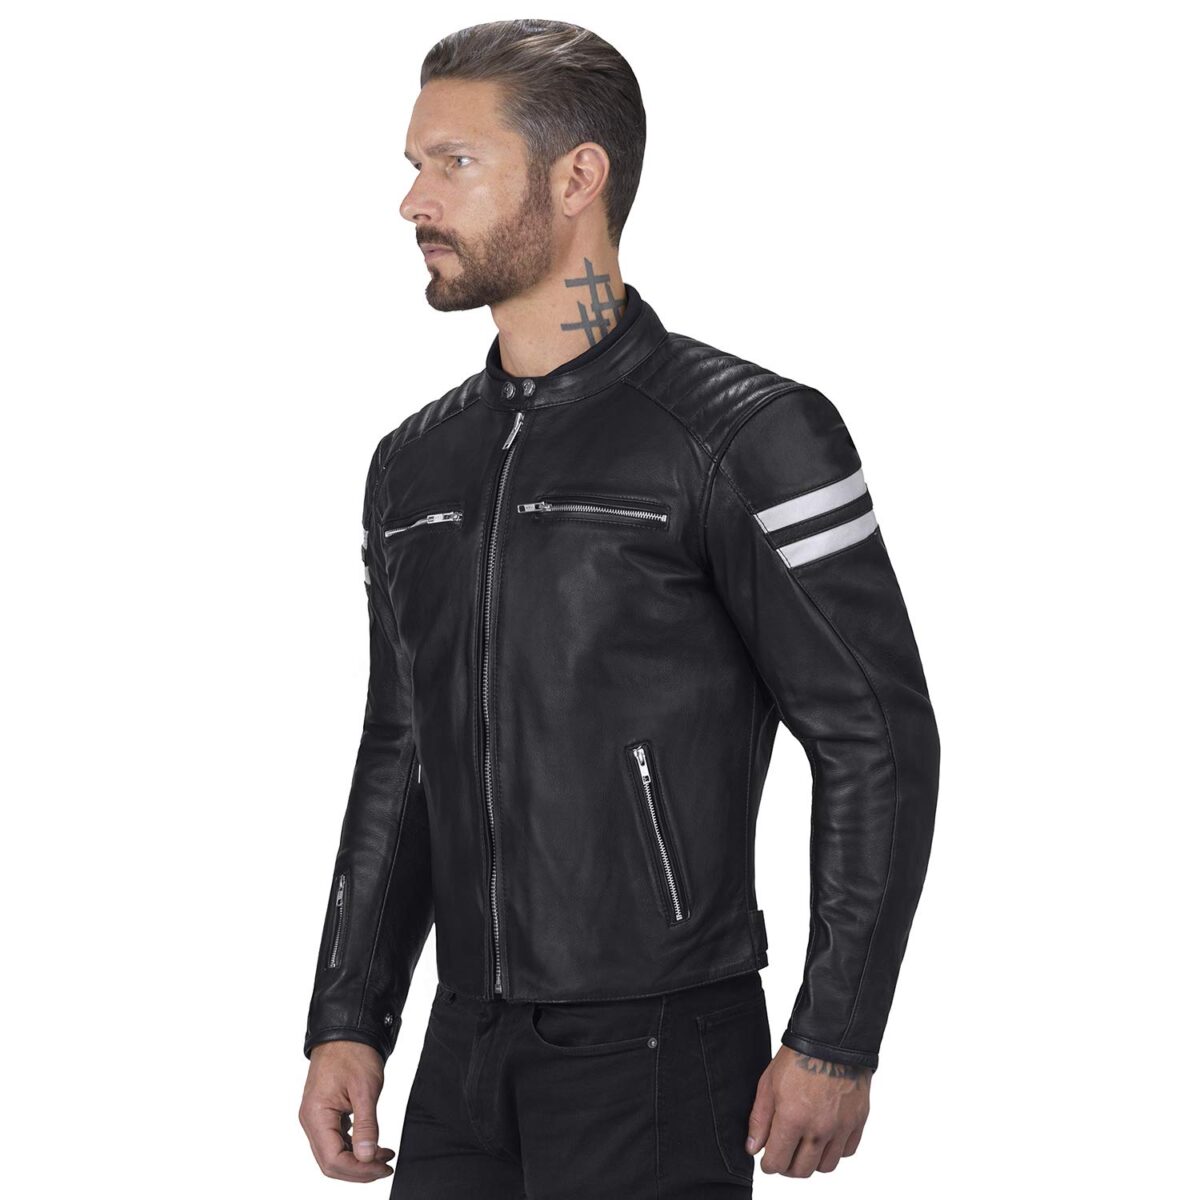 leather jacket with white stripes on sleeves